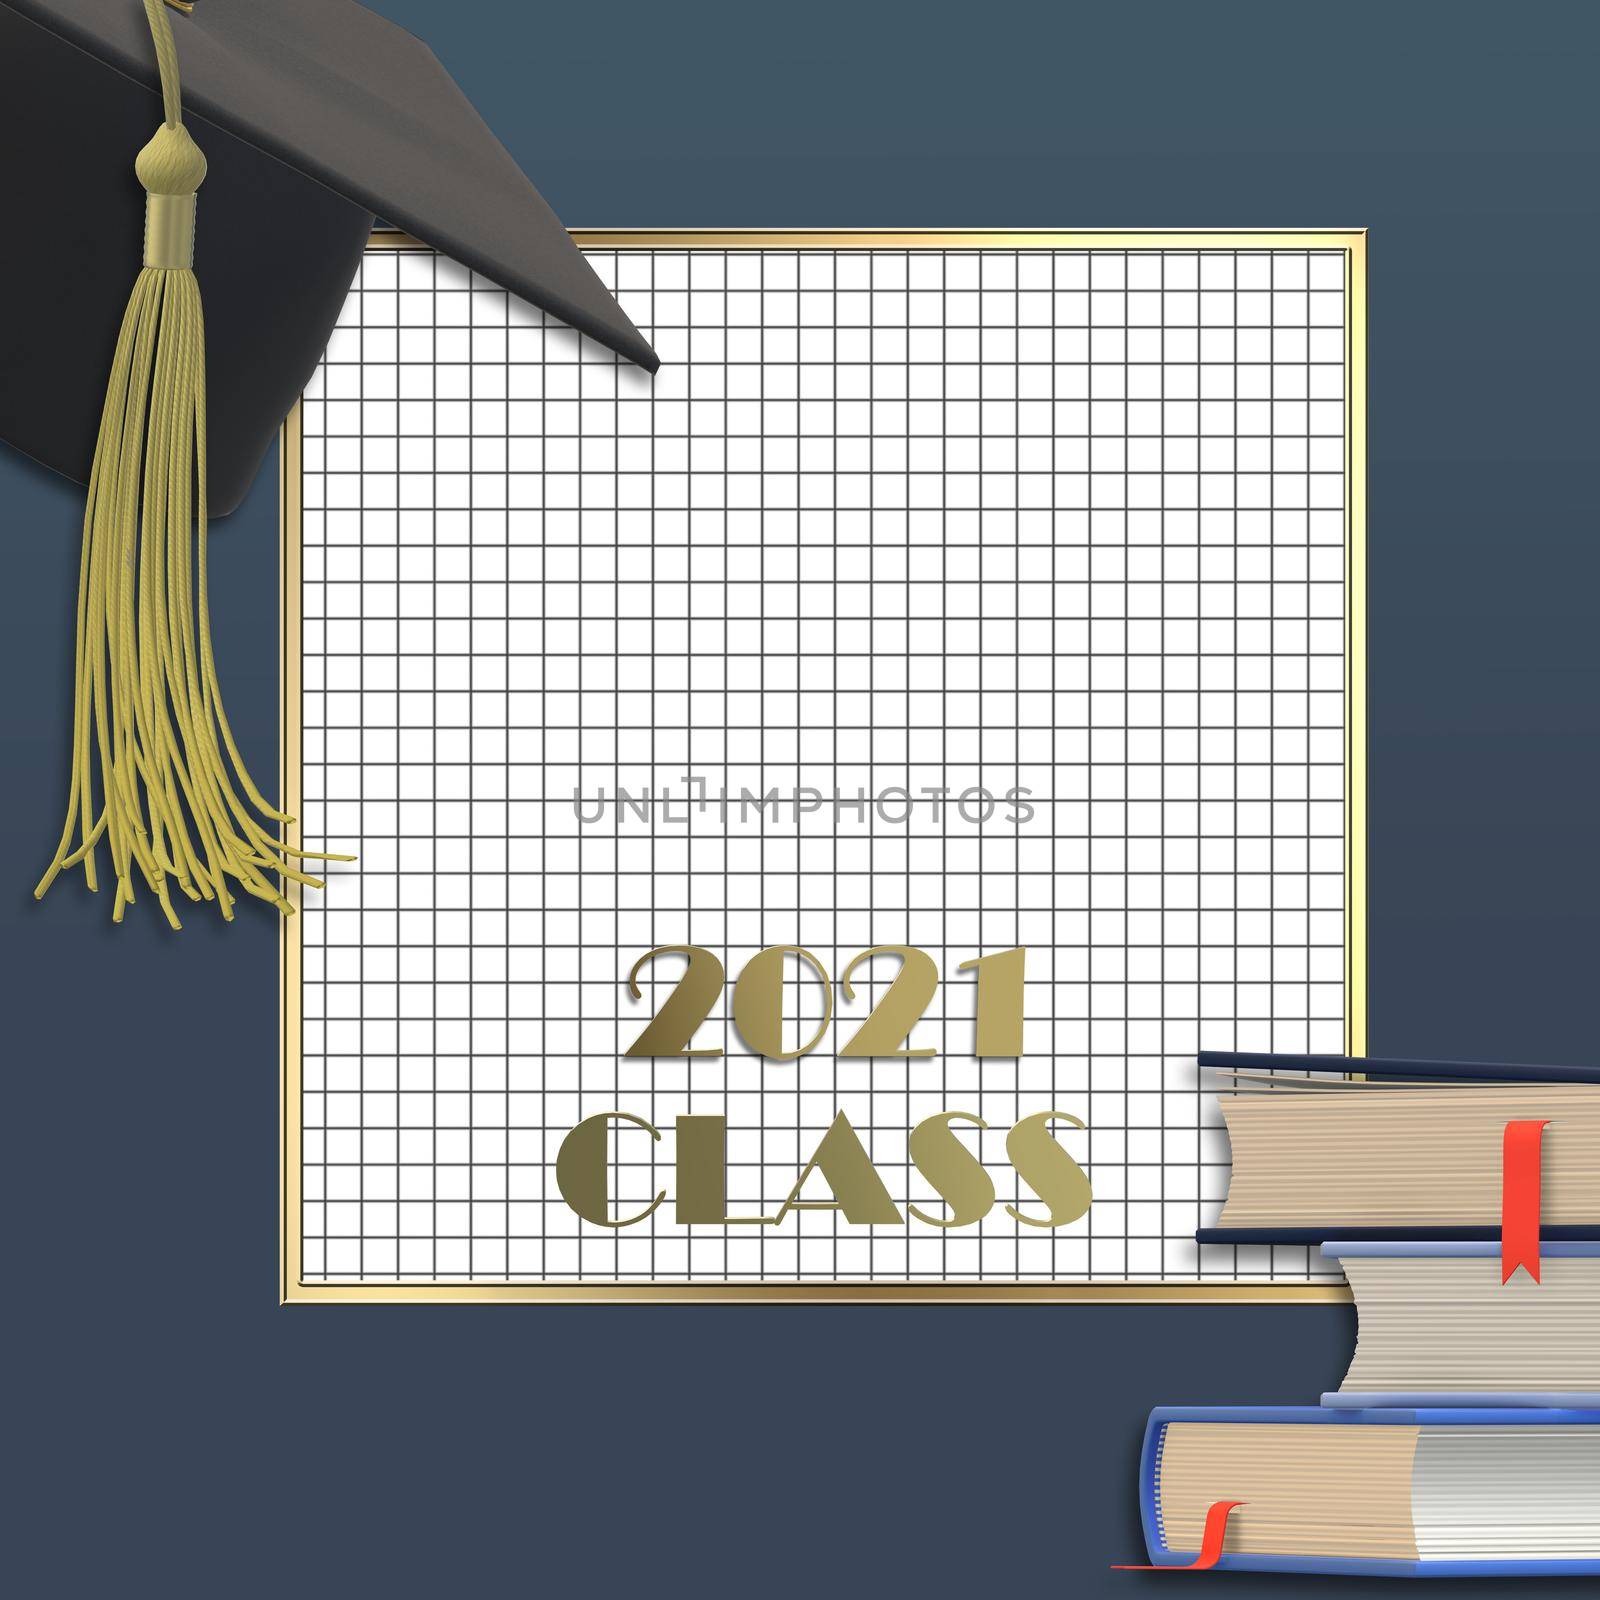 Graduation 2021 cap with tassel. Class of 2021 year on squared graph grid paper, pile of books Education concept, isolated. Place for text, copy space. 3D illustration